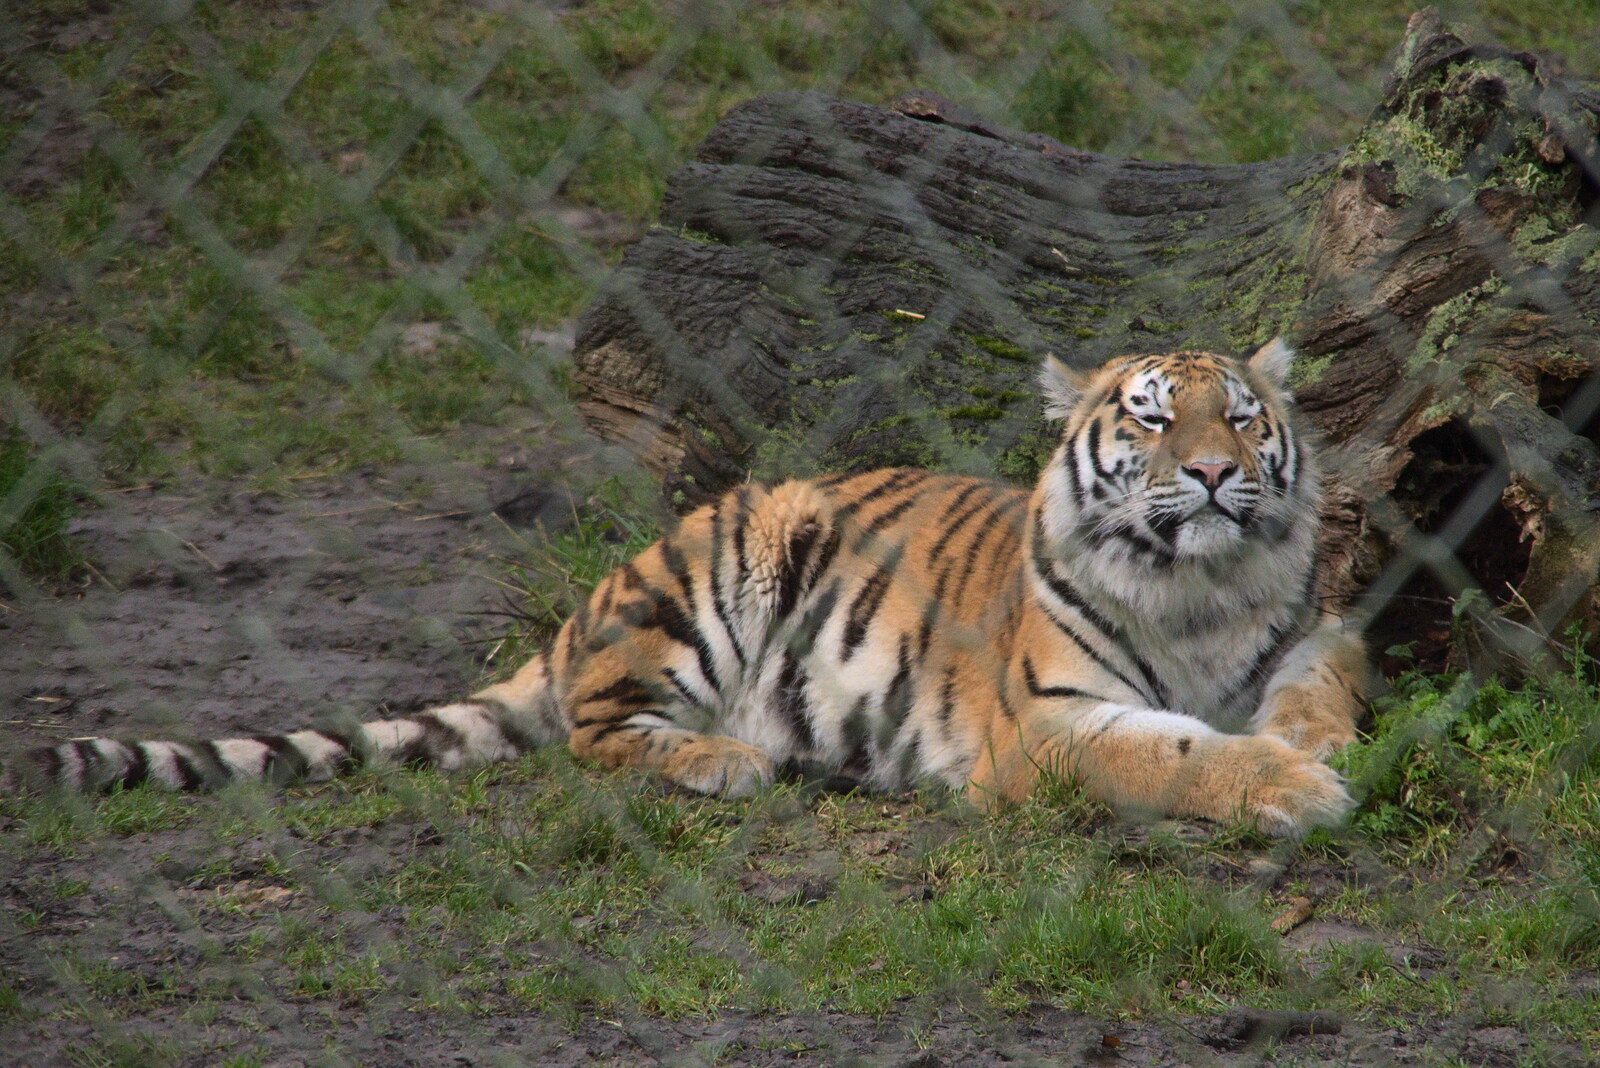 A Few Hours at the Zoo, Banham, Norfolk - 8th January 2023: Another tiger hangs around